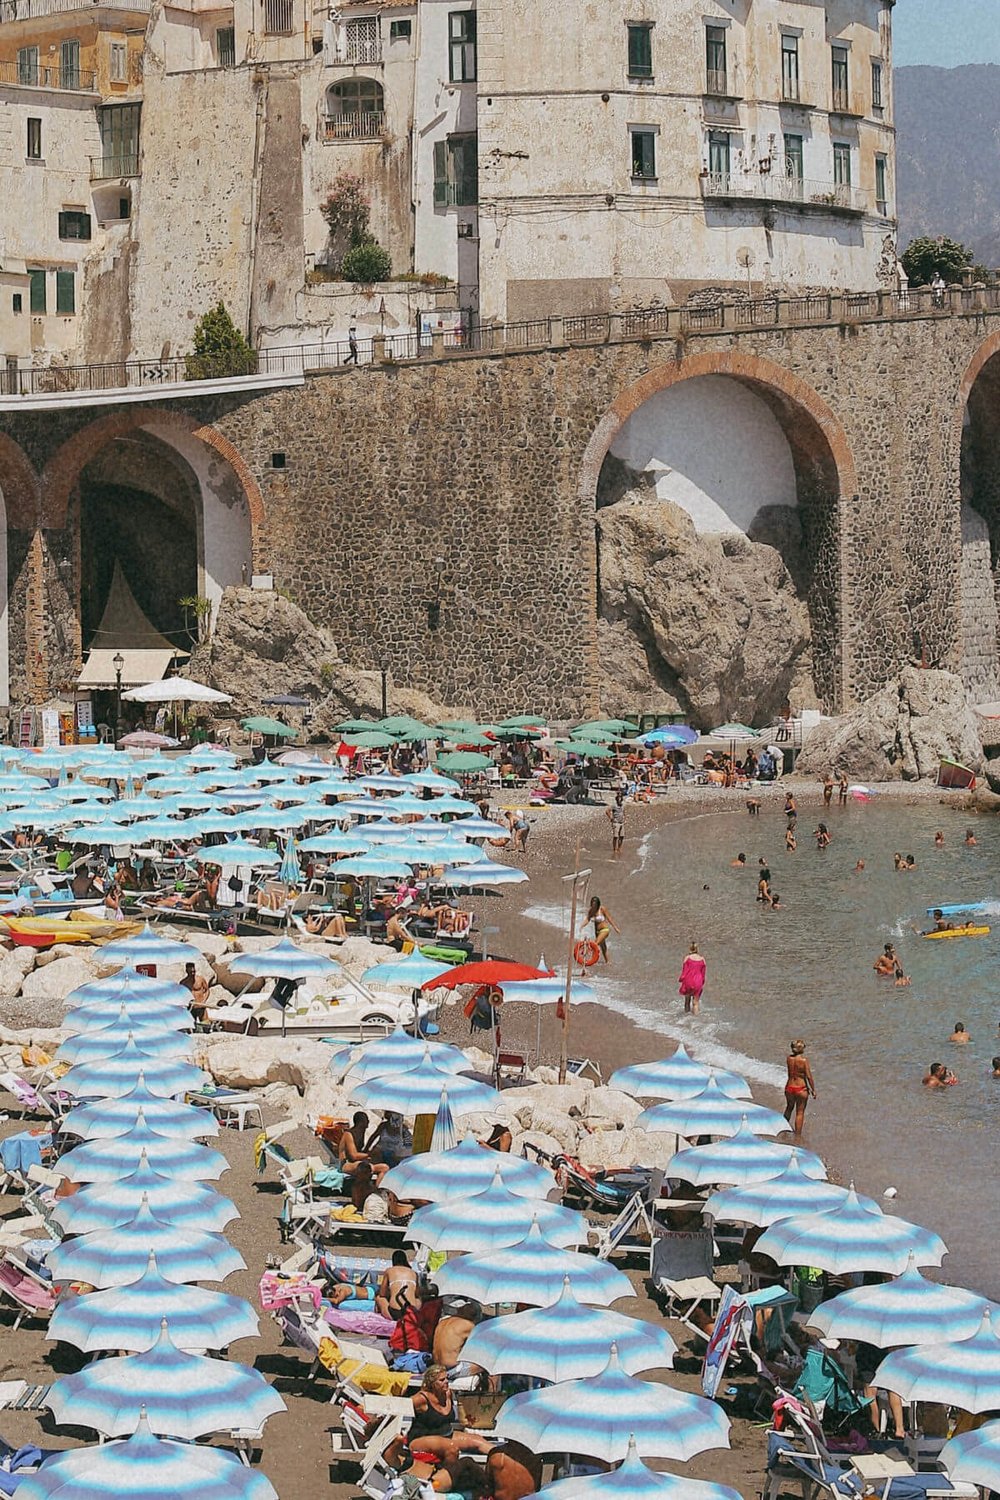 A guide to help you decide which Positano beach to go to